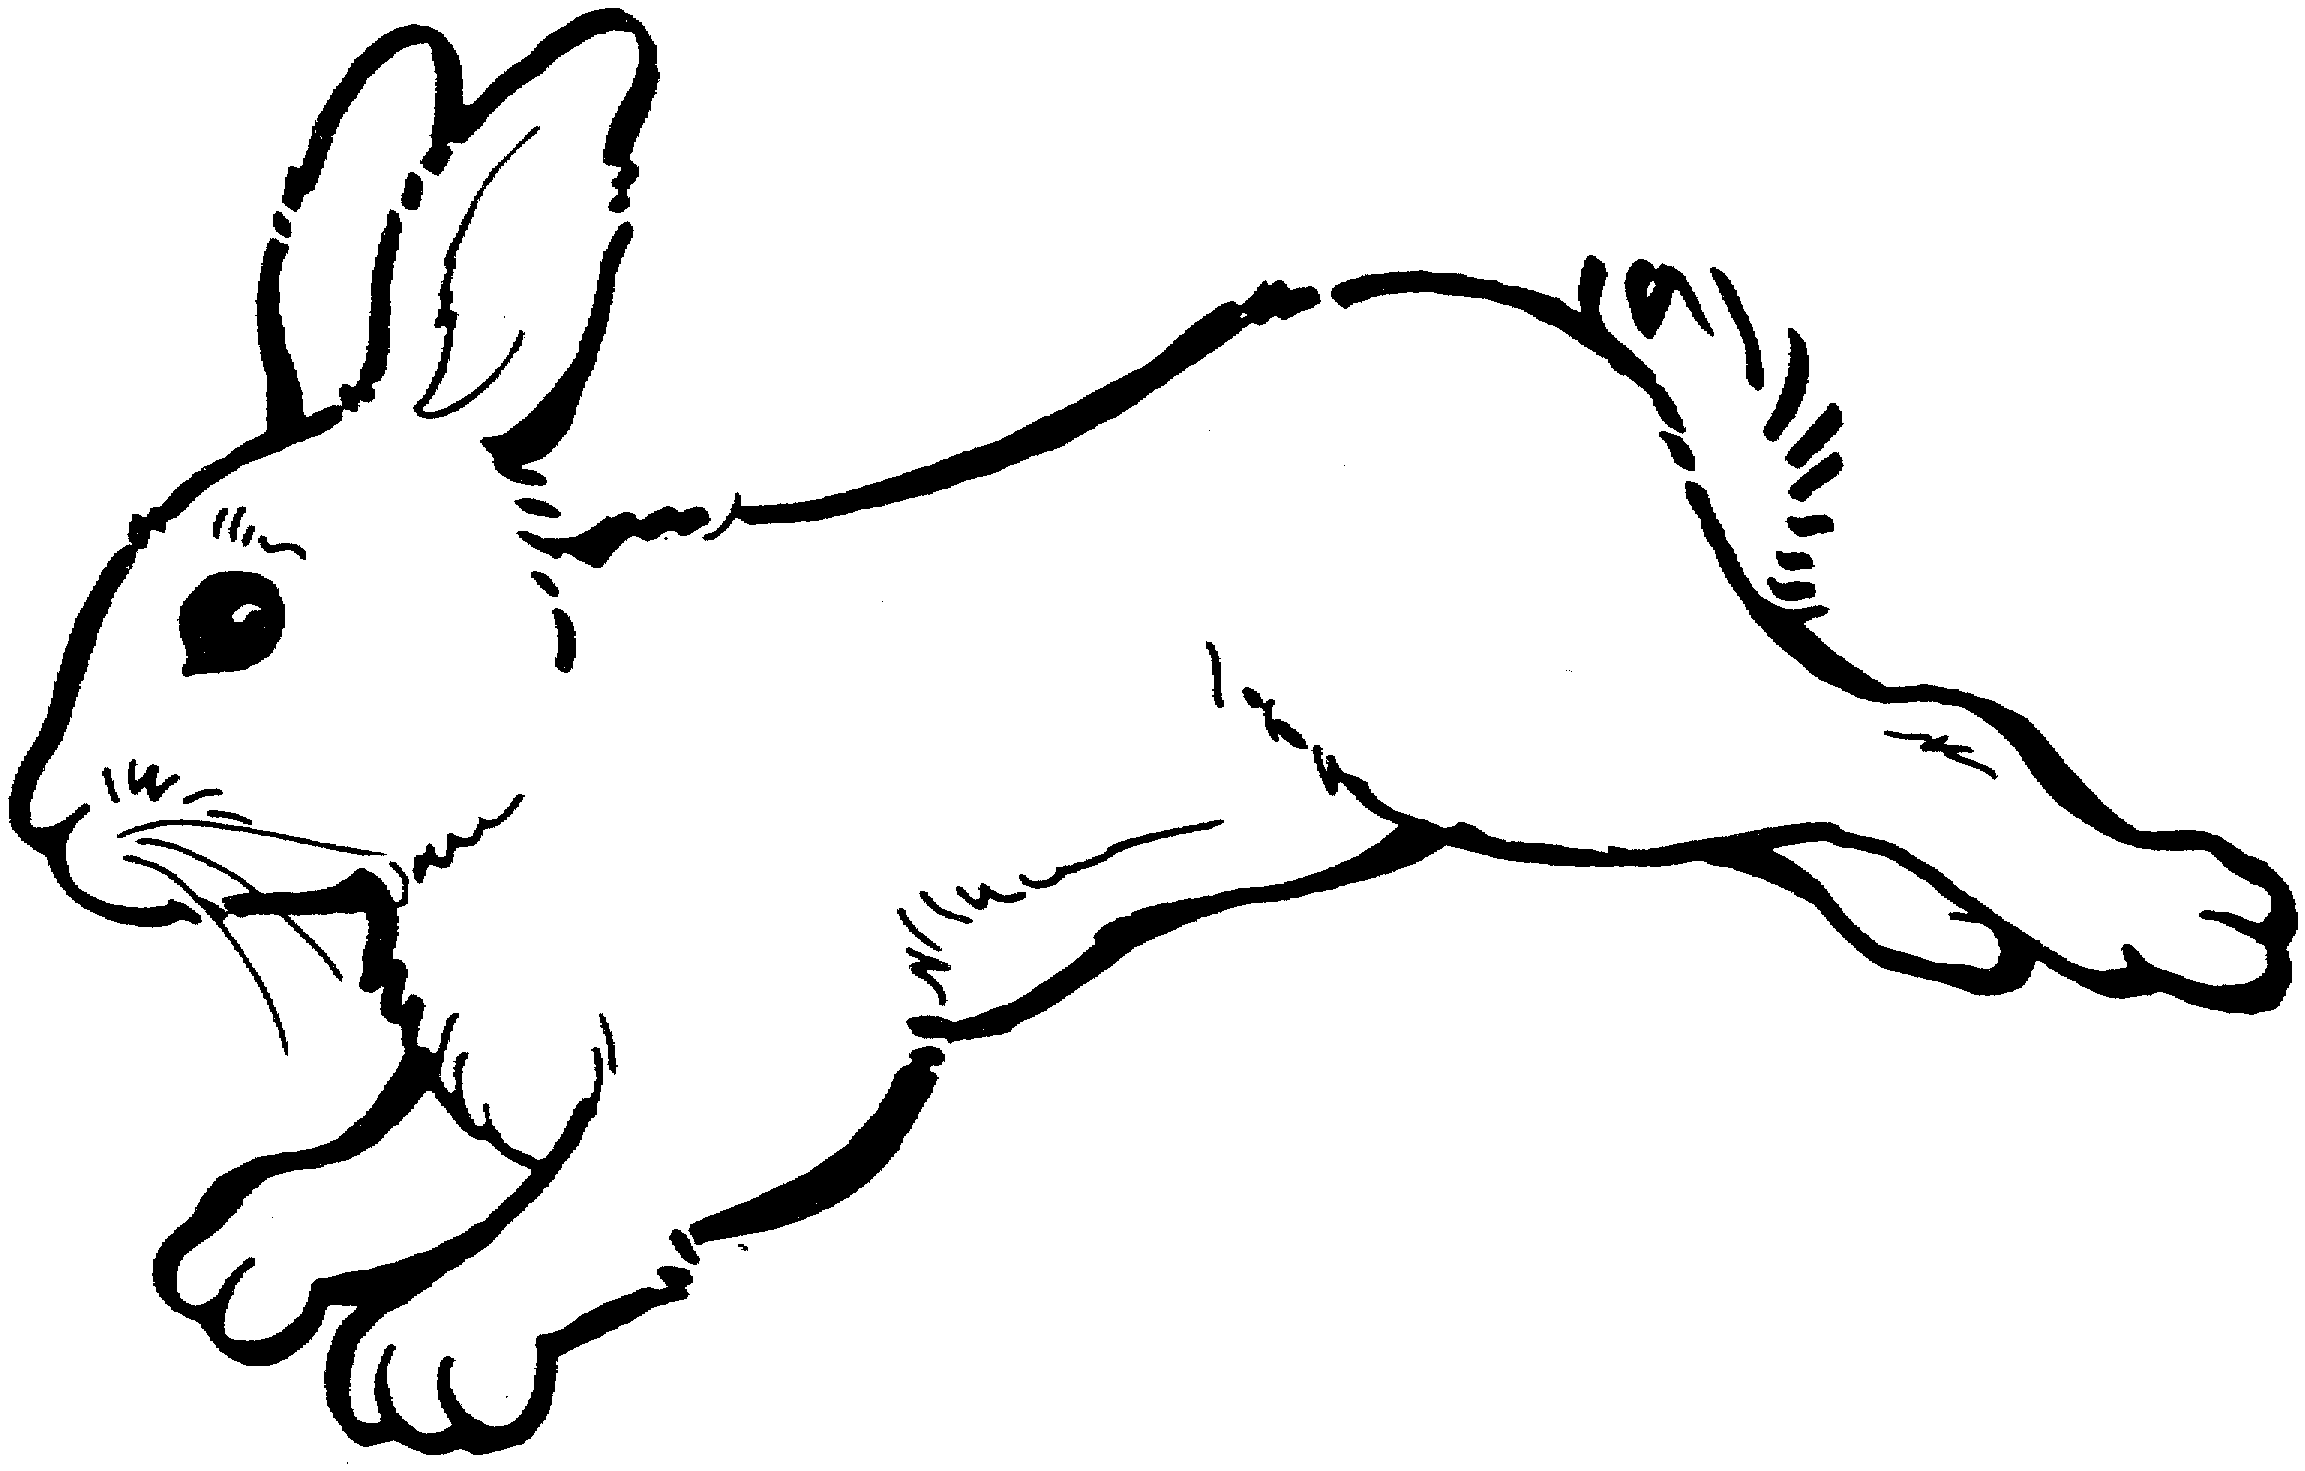 Rabbit black and white bunny black and white clipart 2 - WikiClipArt